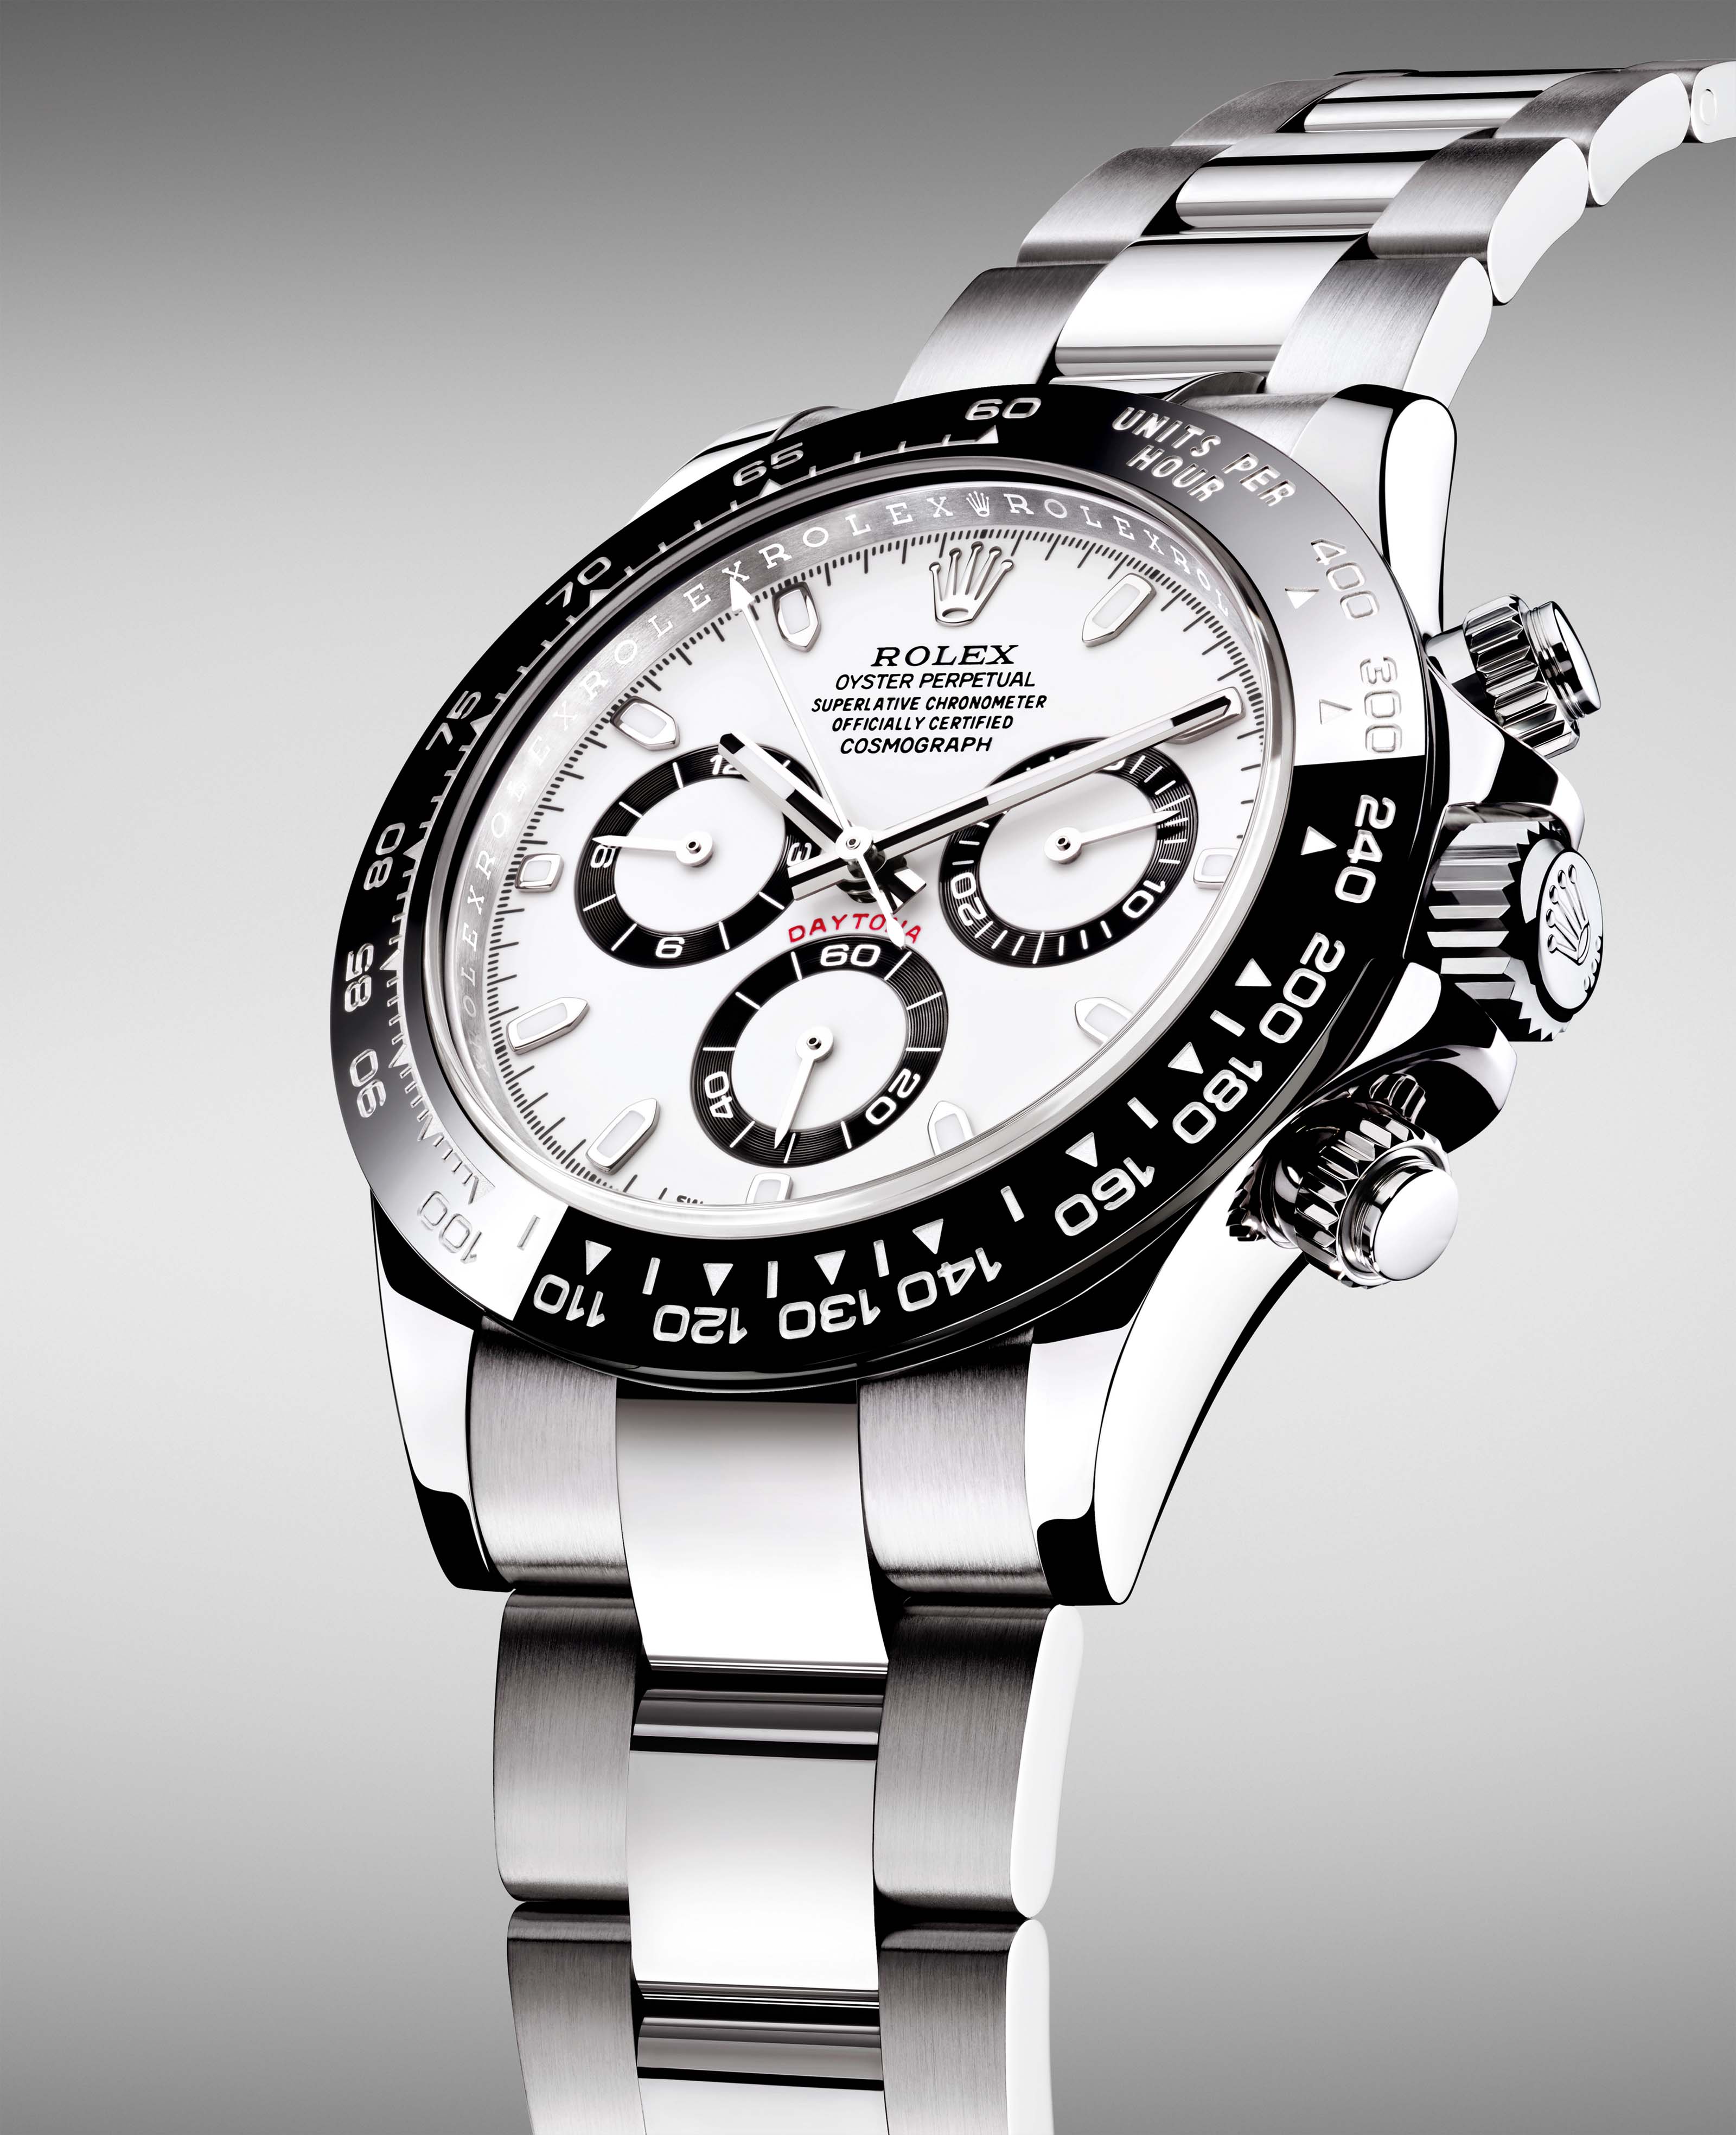 prix rolex oyster perpetual superlative chronometer officially certified cosmograph